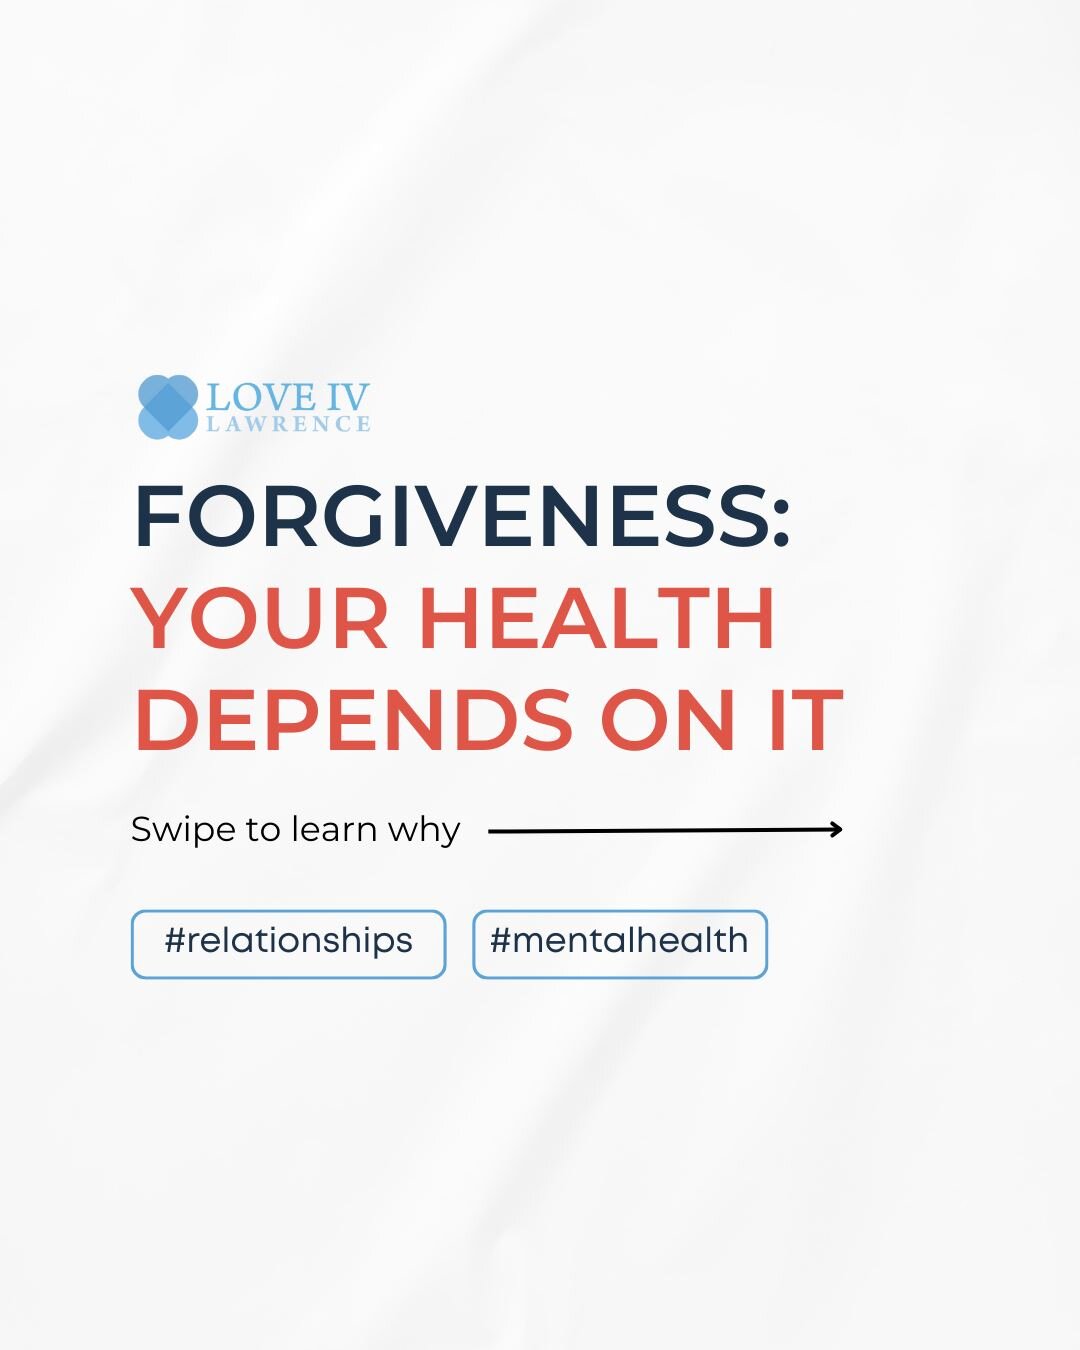 Can we learn to be more forgiving? Drop your thoughts or personal experiences with forgiveness in the comments below! 💭

According to recent studies, practicing forgiveness can reduce stress, lower blood pressure, and boost your mood. Remember, forg